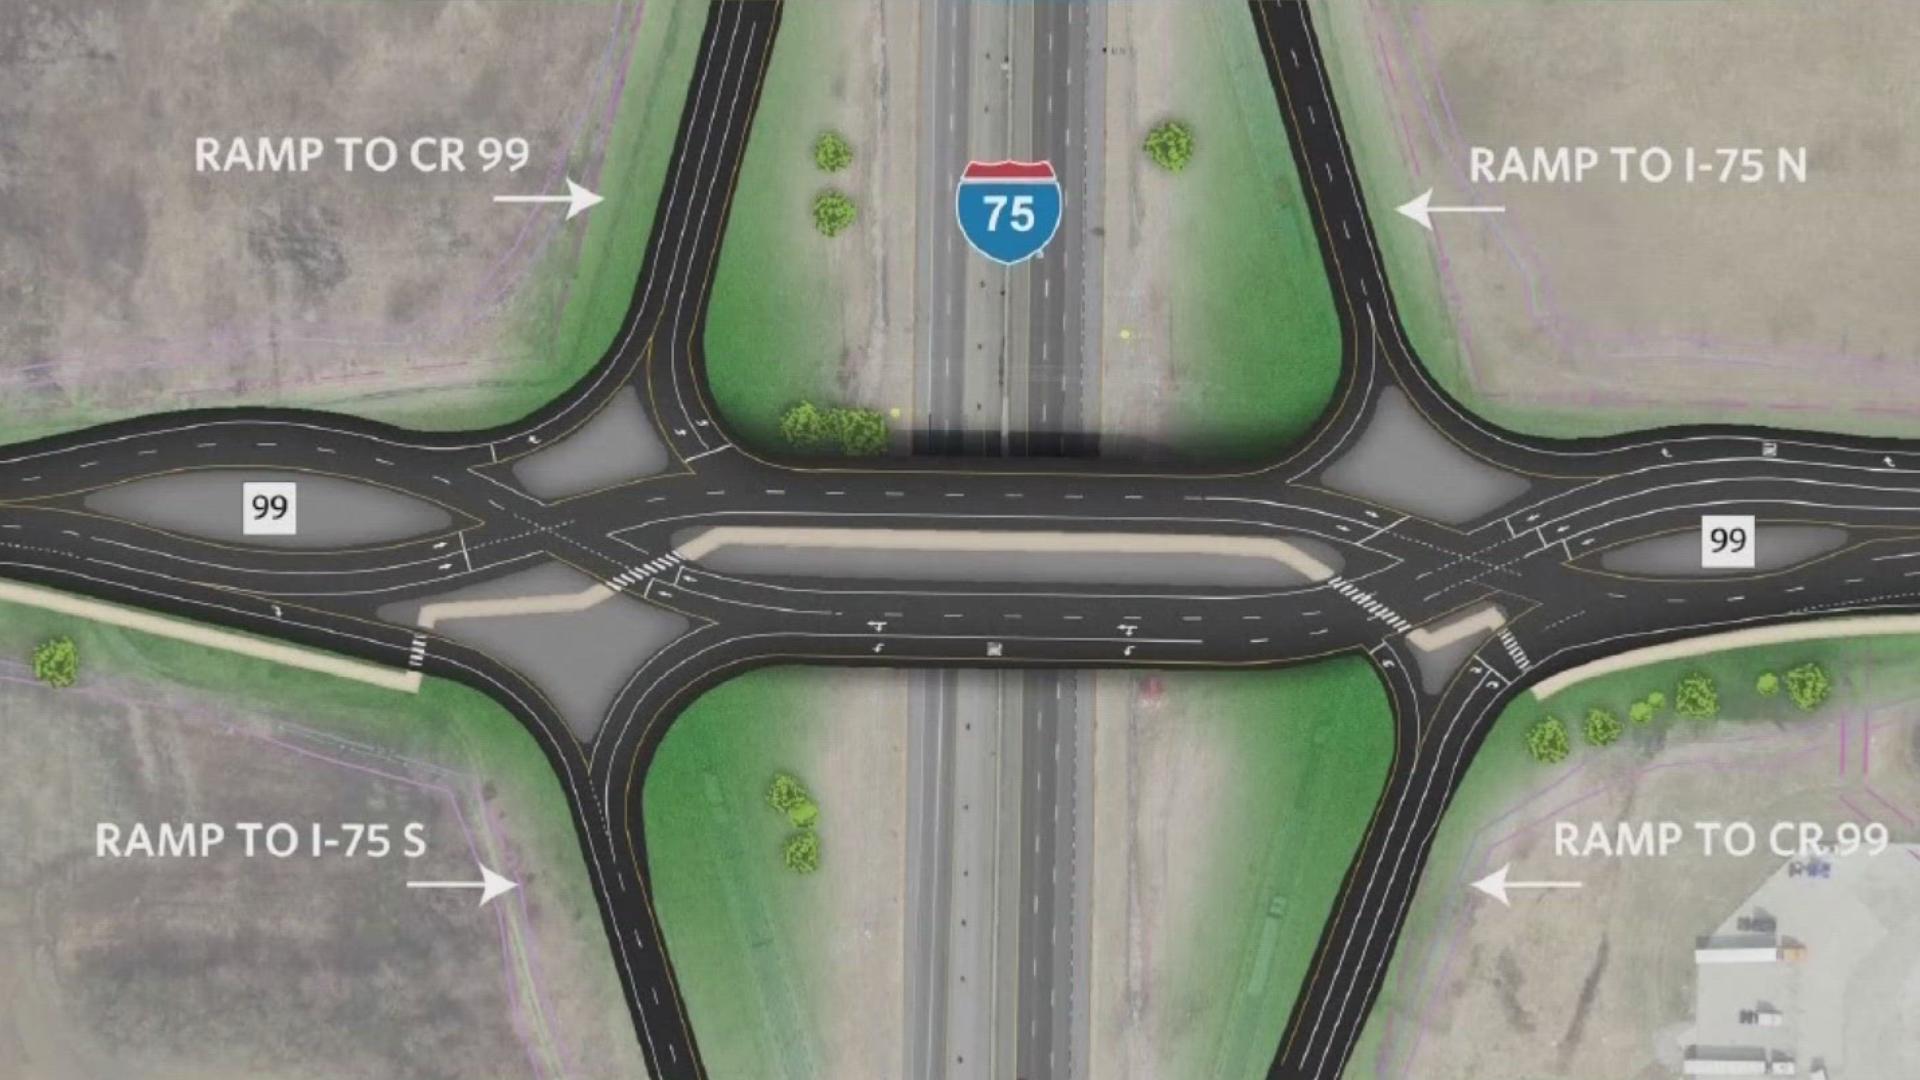 The existing interchange has 56% more traffic than it's designed to handle, according to the Ohio Department of Transportation.